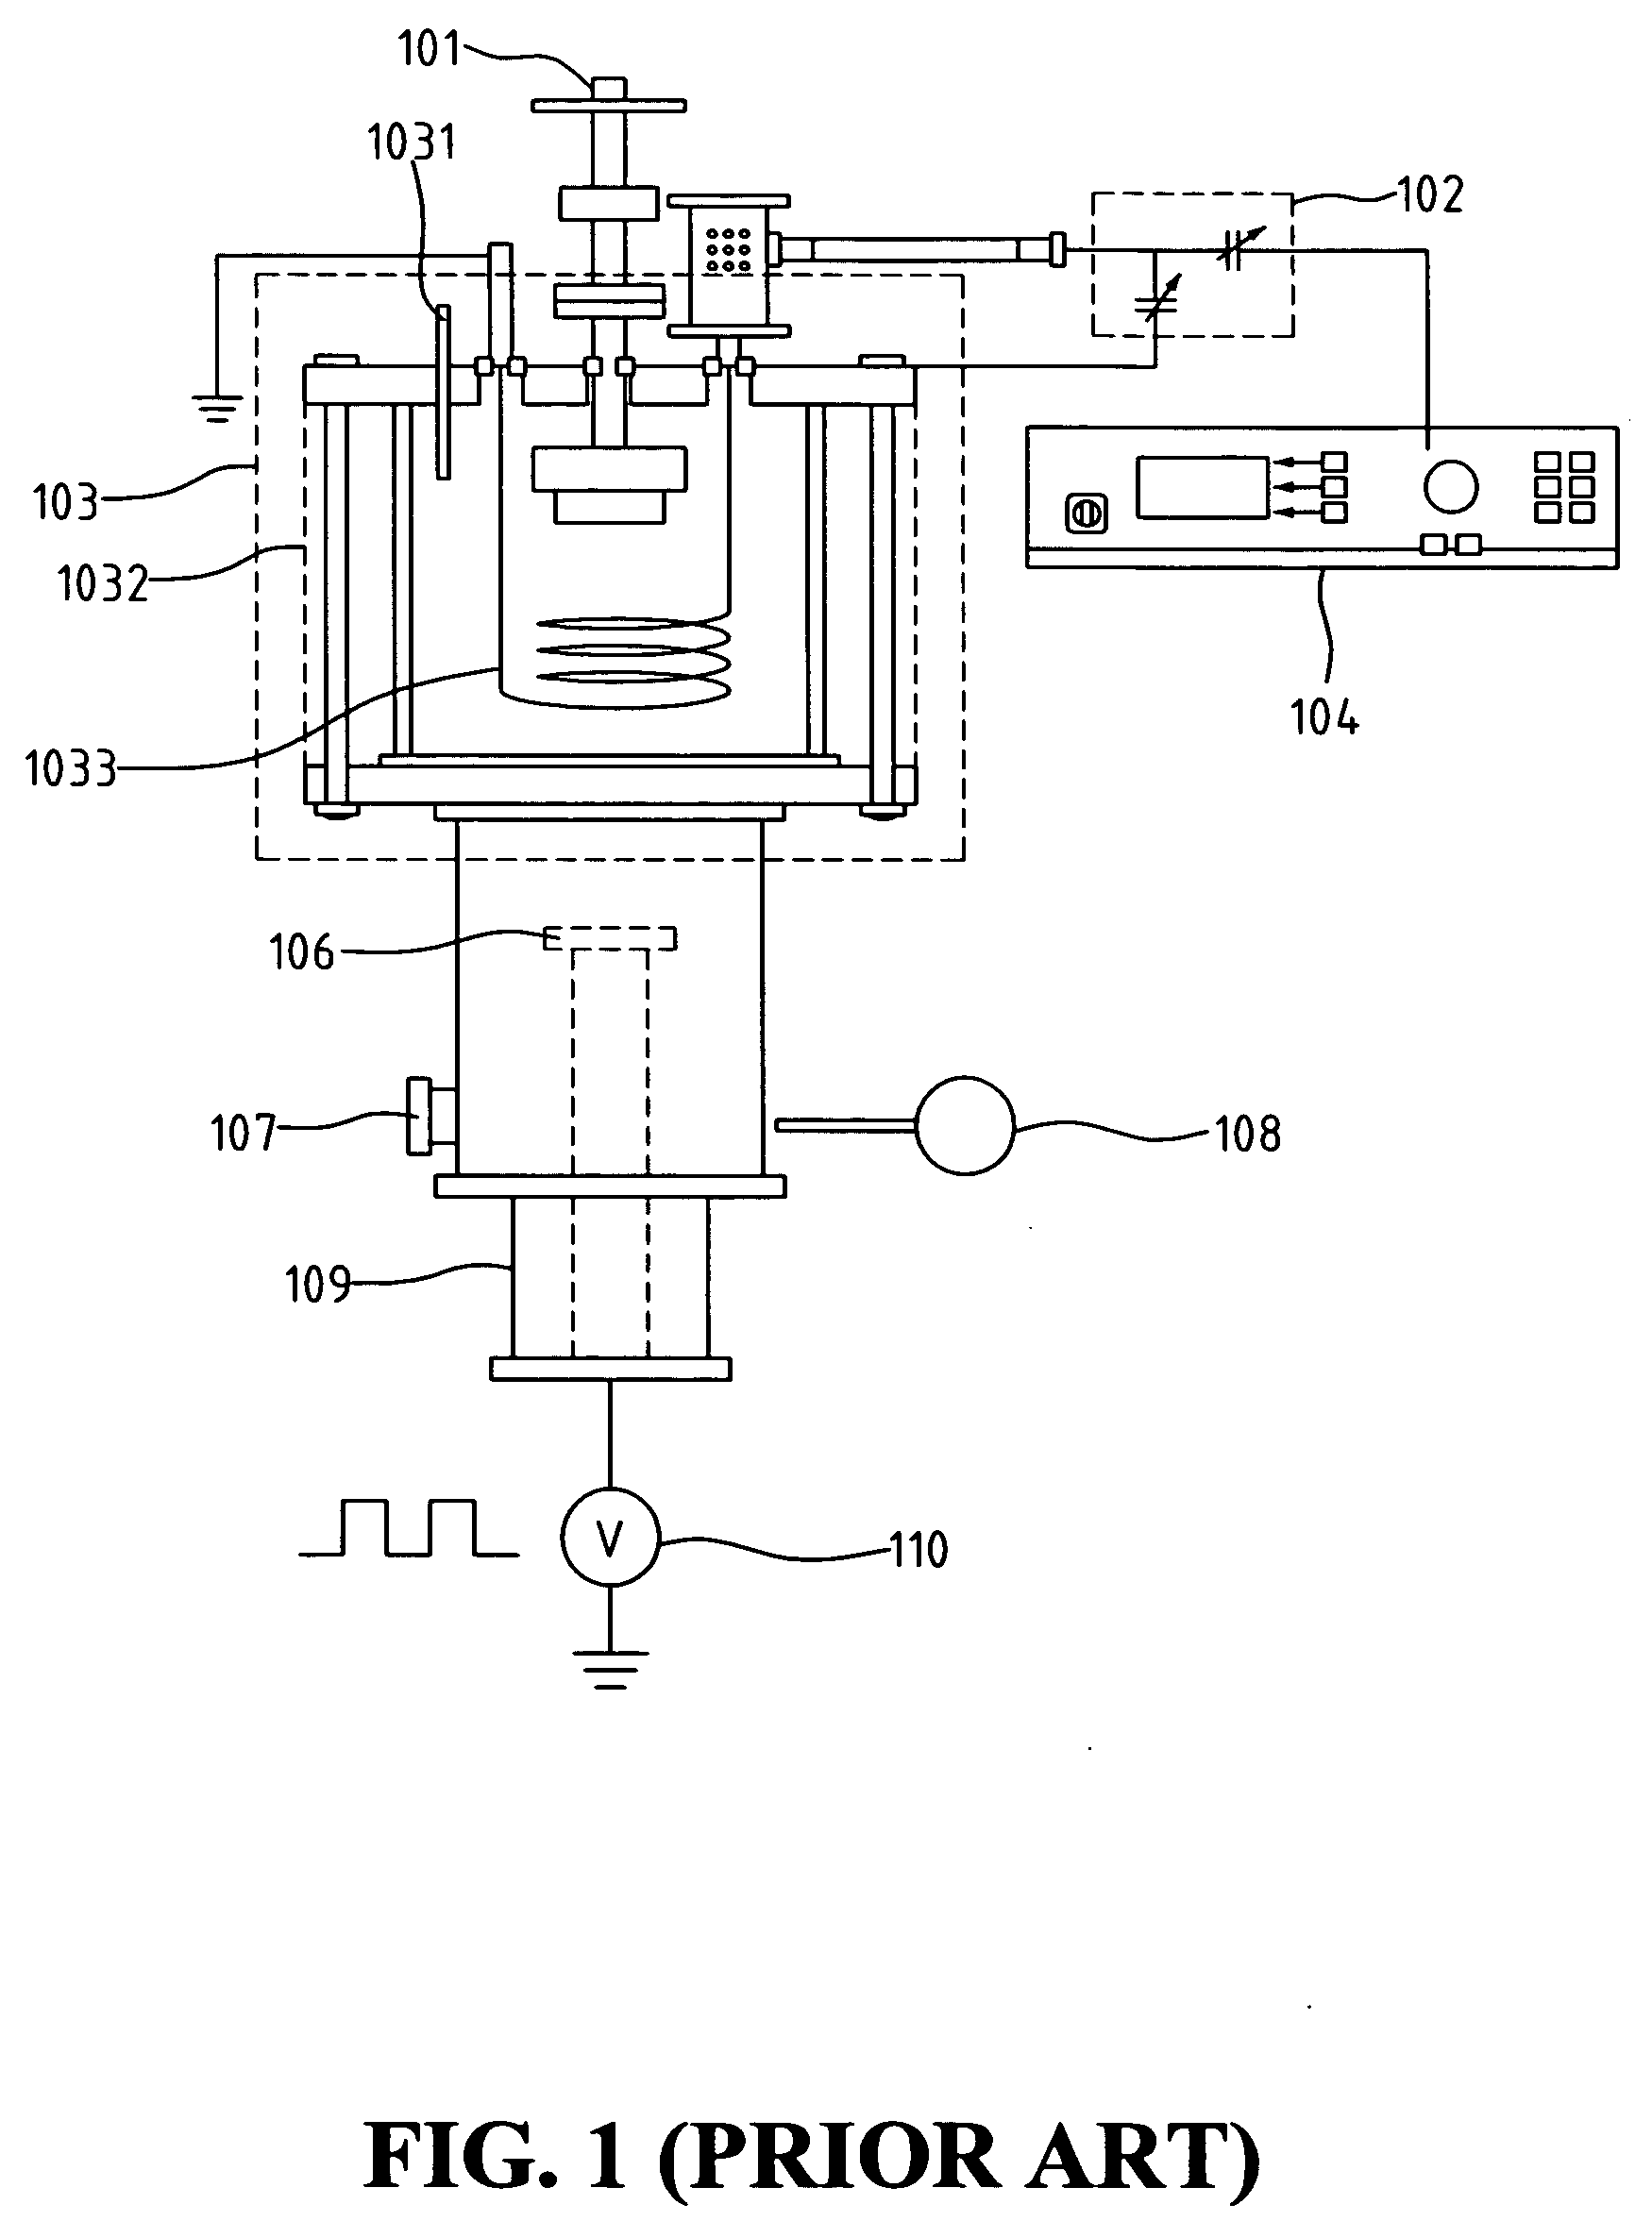 Method for the surface activation on the metalization of electronic devices